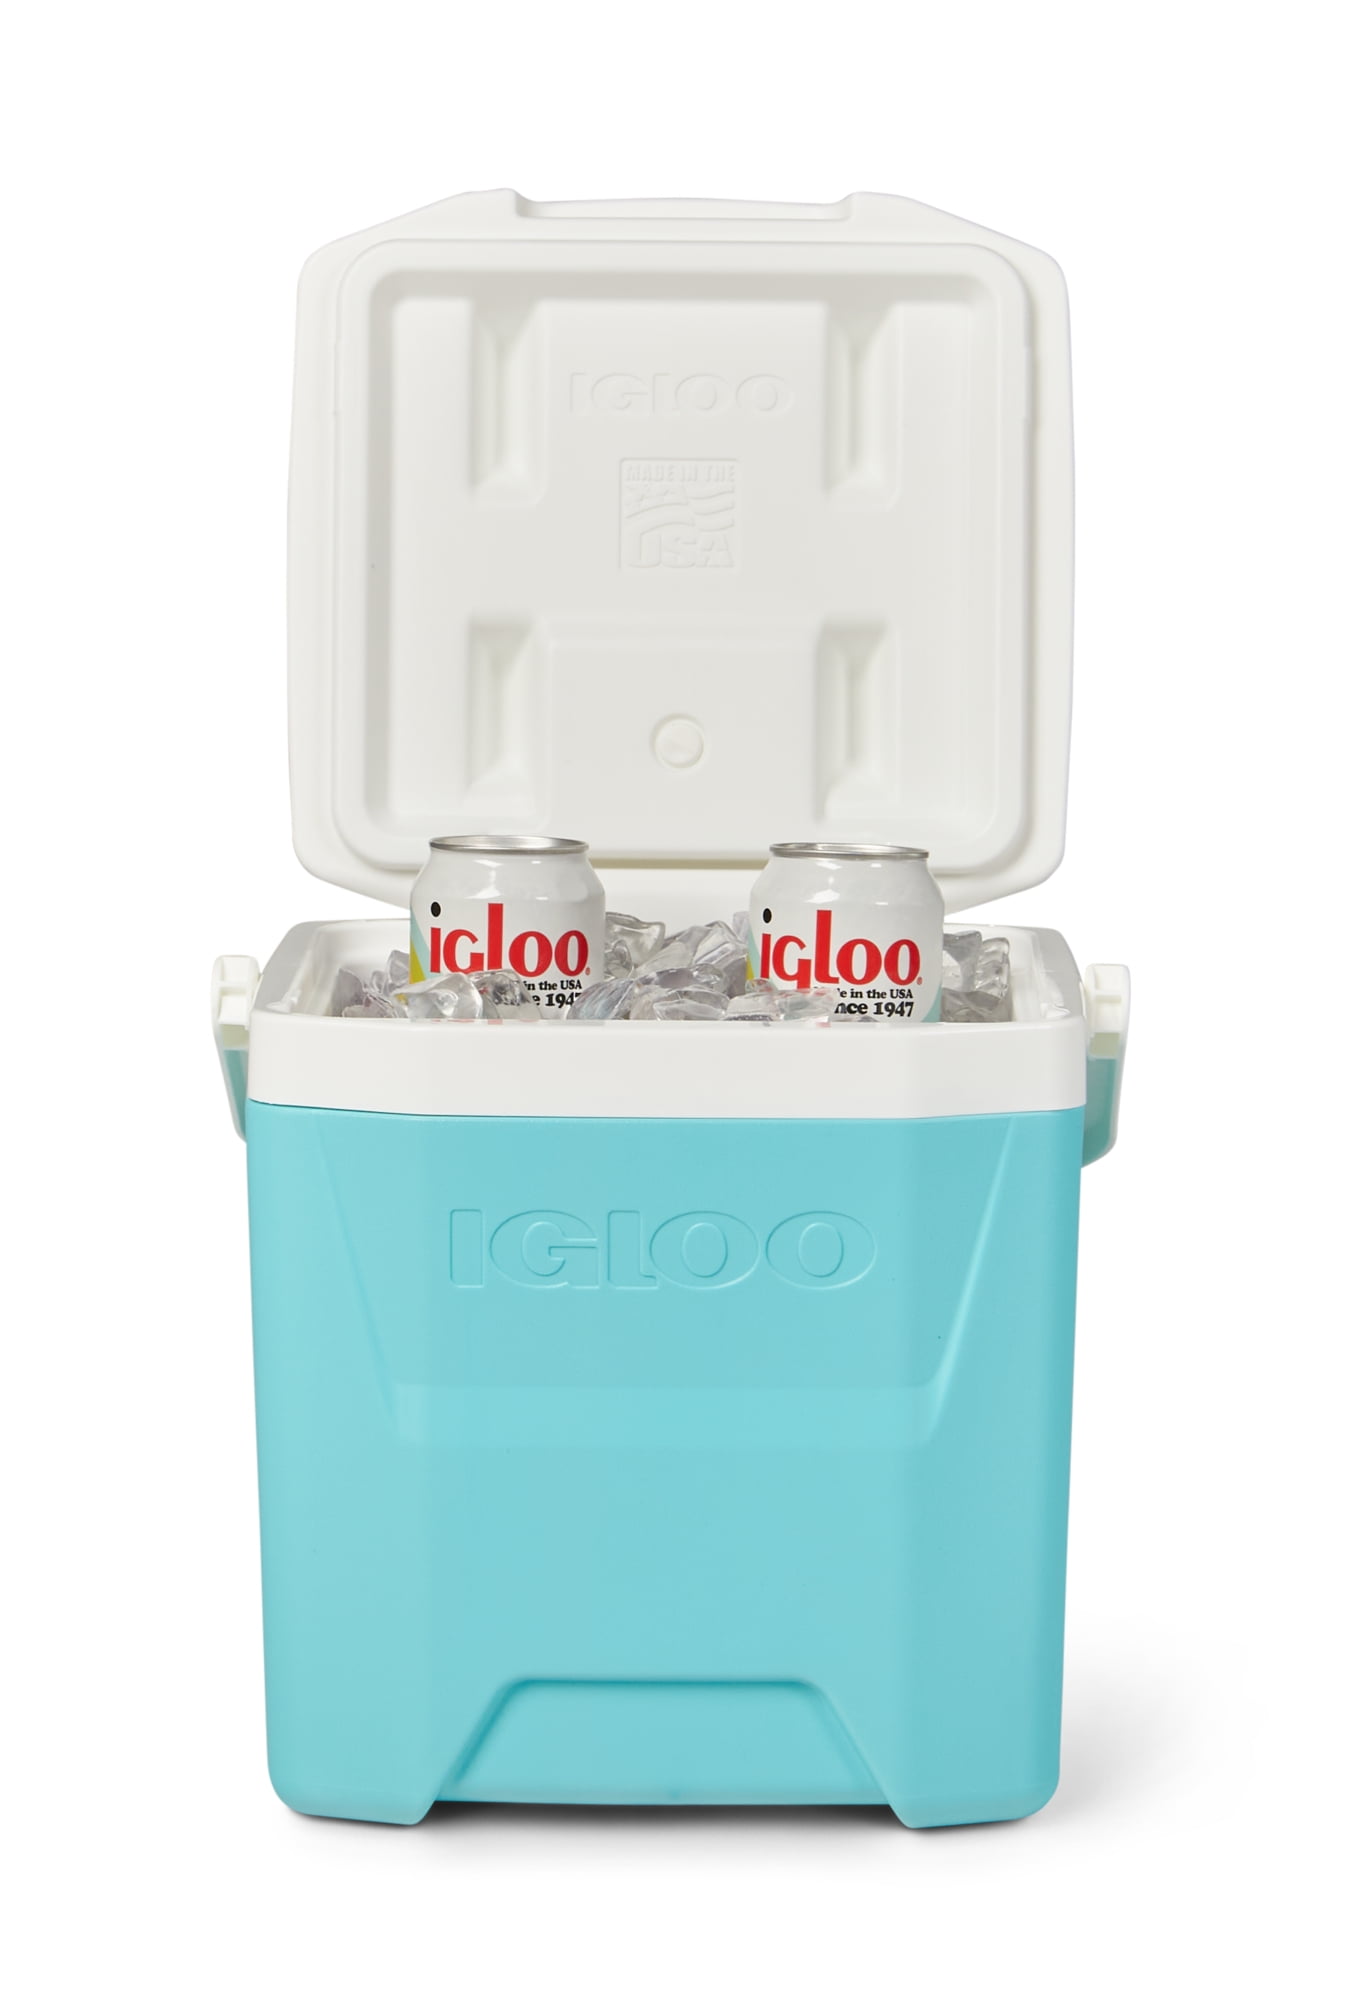 Blue 2 pk Igloo Summer High-Quality Easy-To-Lift/Carry Ice Cube 12 Qt Cooler 